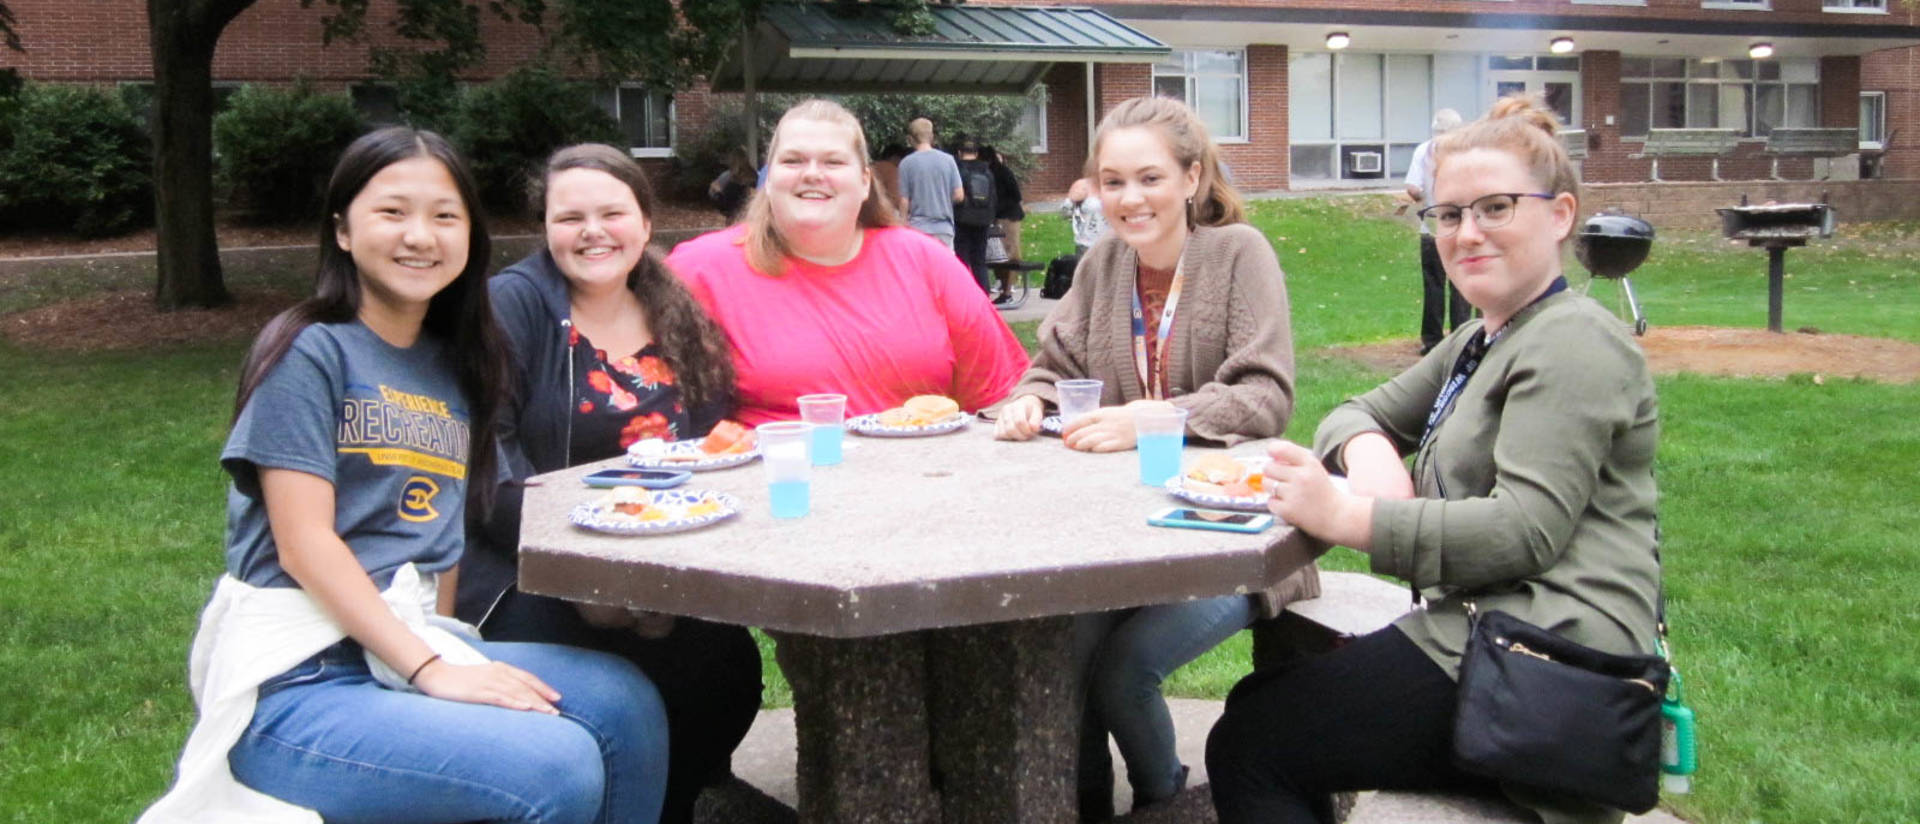 Group of four females smile at a picnic table